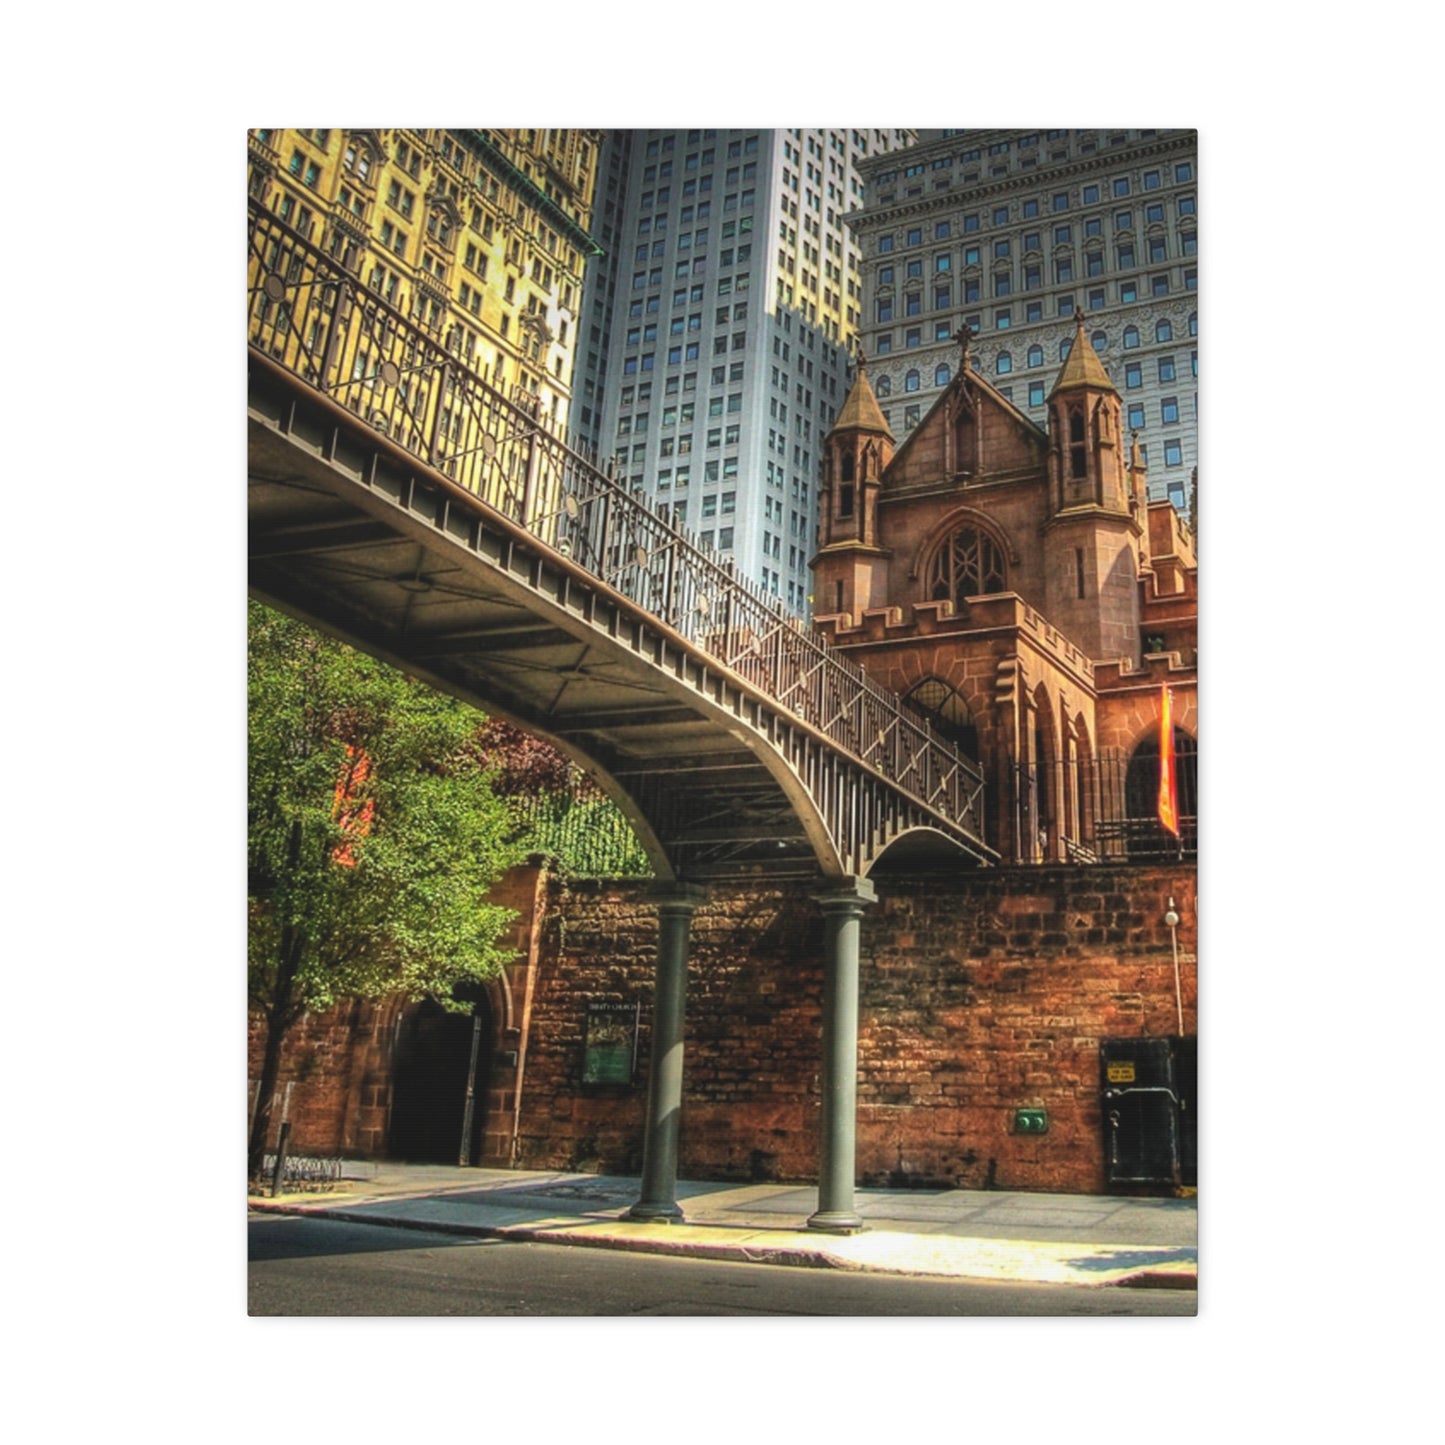 Canvas Print Of Church In New York City For Wall Art